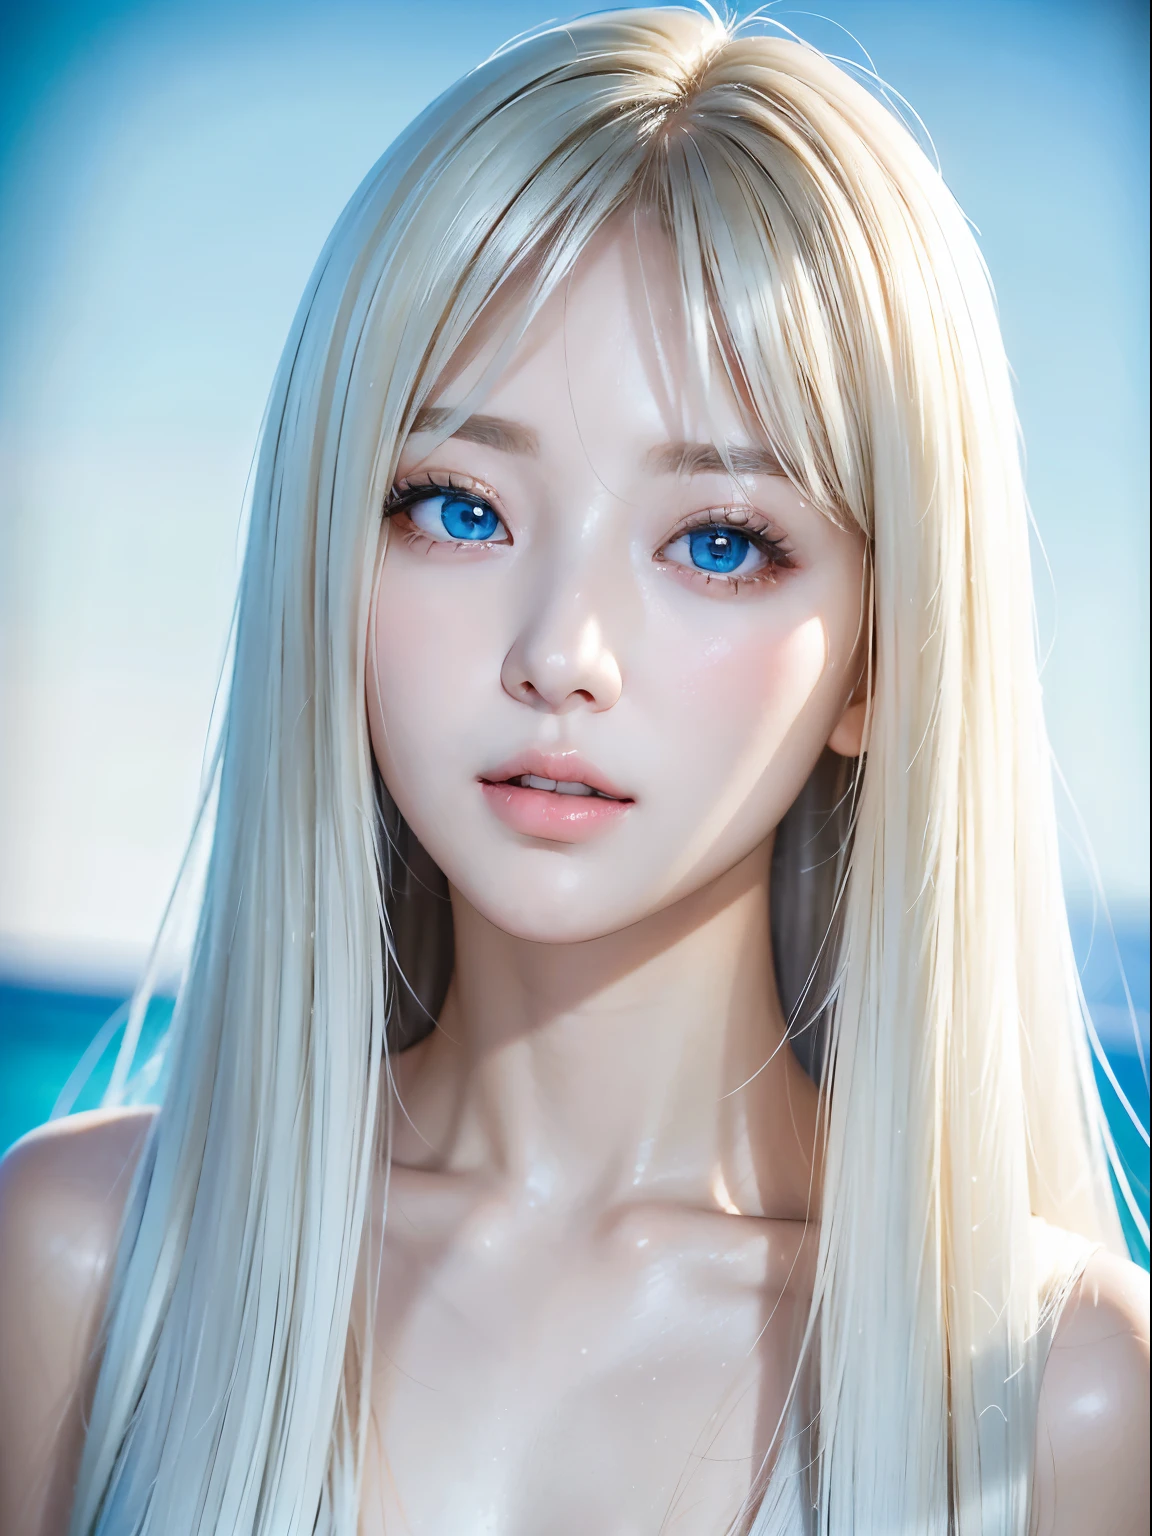 One girl、Portrait、、blue sky、Bright and beautiful face、Young, white and radiant skin、Great looks、Blonde hair that reflects the light、Beautiful platinum blonde super long silky straight hair、Long Bangs、Very beautiful 17 years old、Big eyes that shine in clear light blue、Beautiful and pretty girl